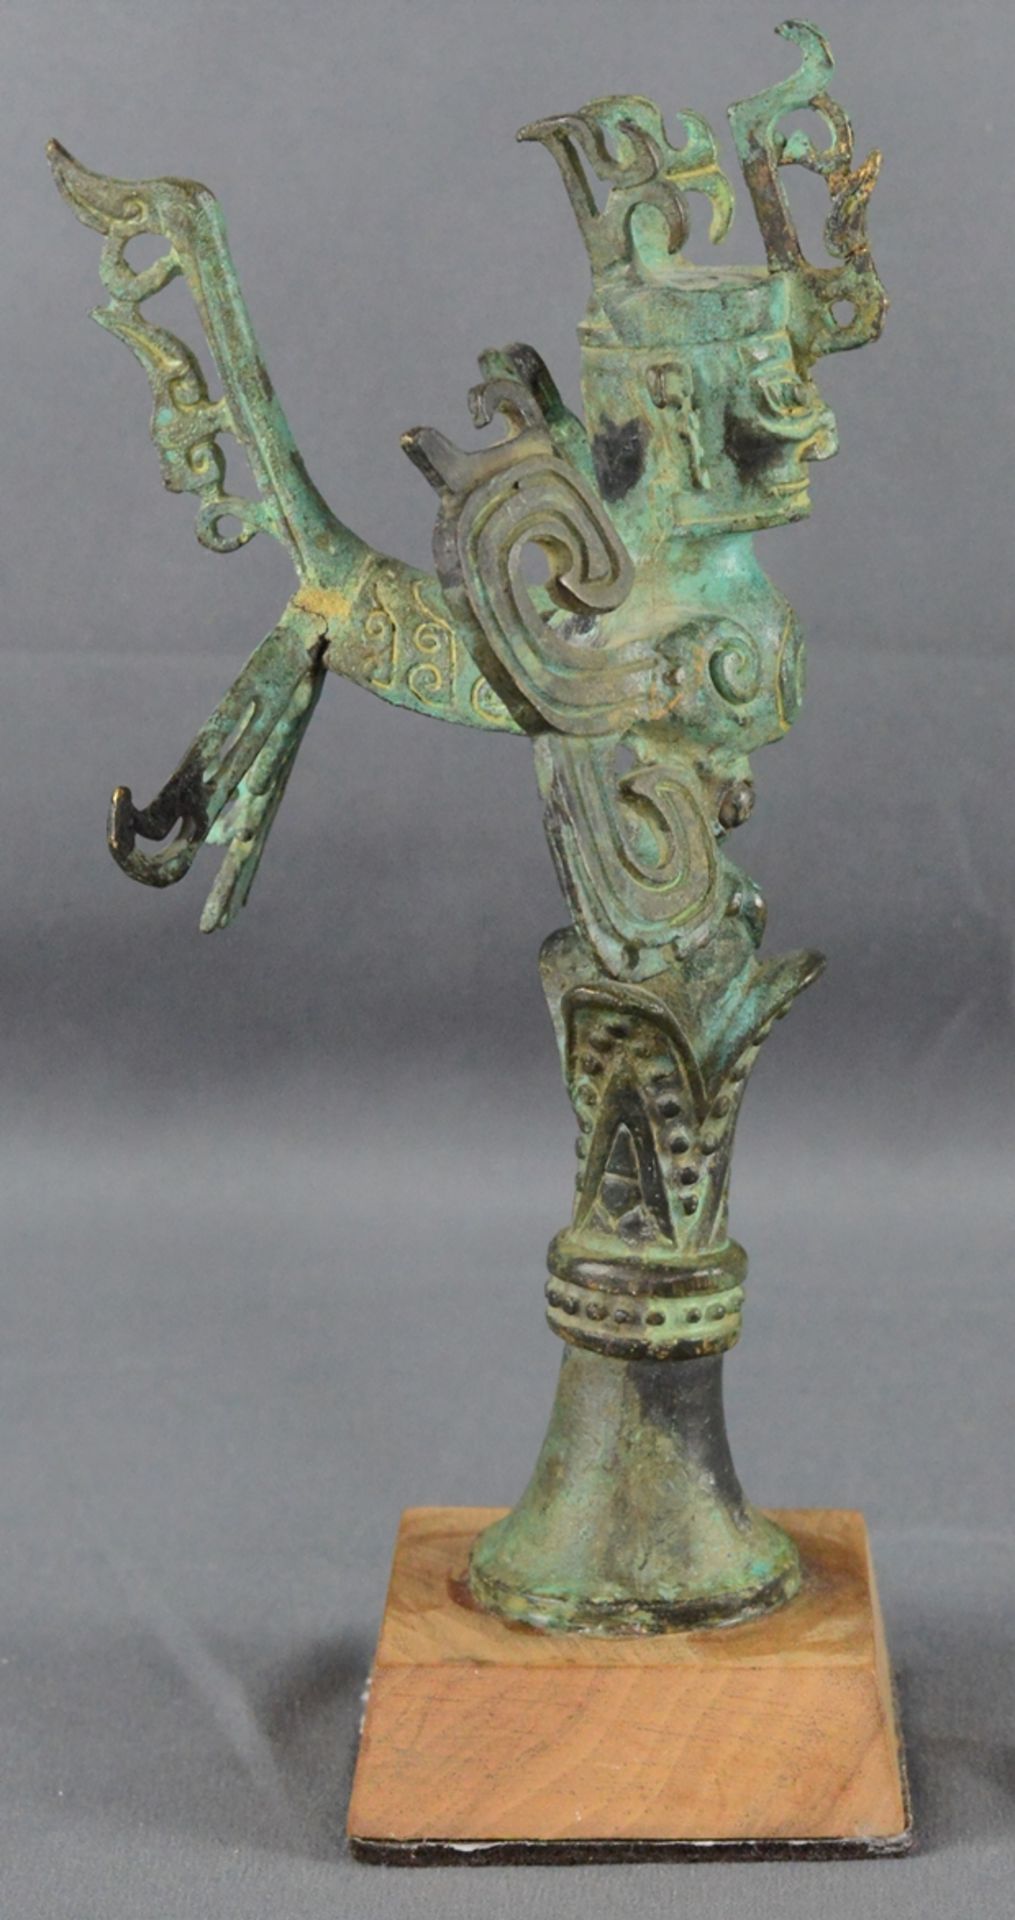 Bird representation, replica after a large bronze statue of the Sanxingdui site in the Sichuan prov - Image 2 of 4